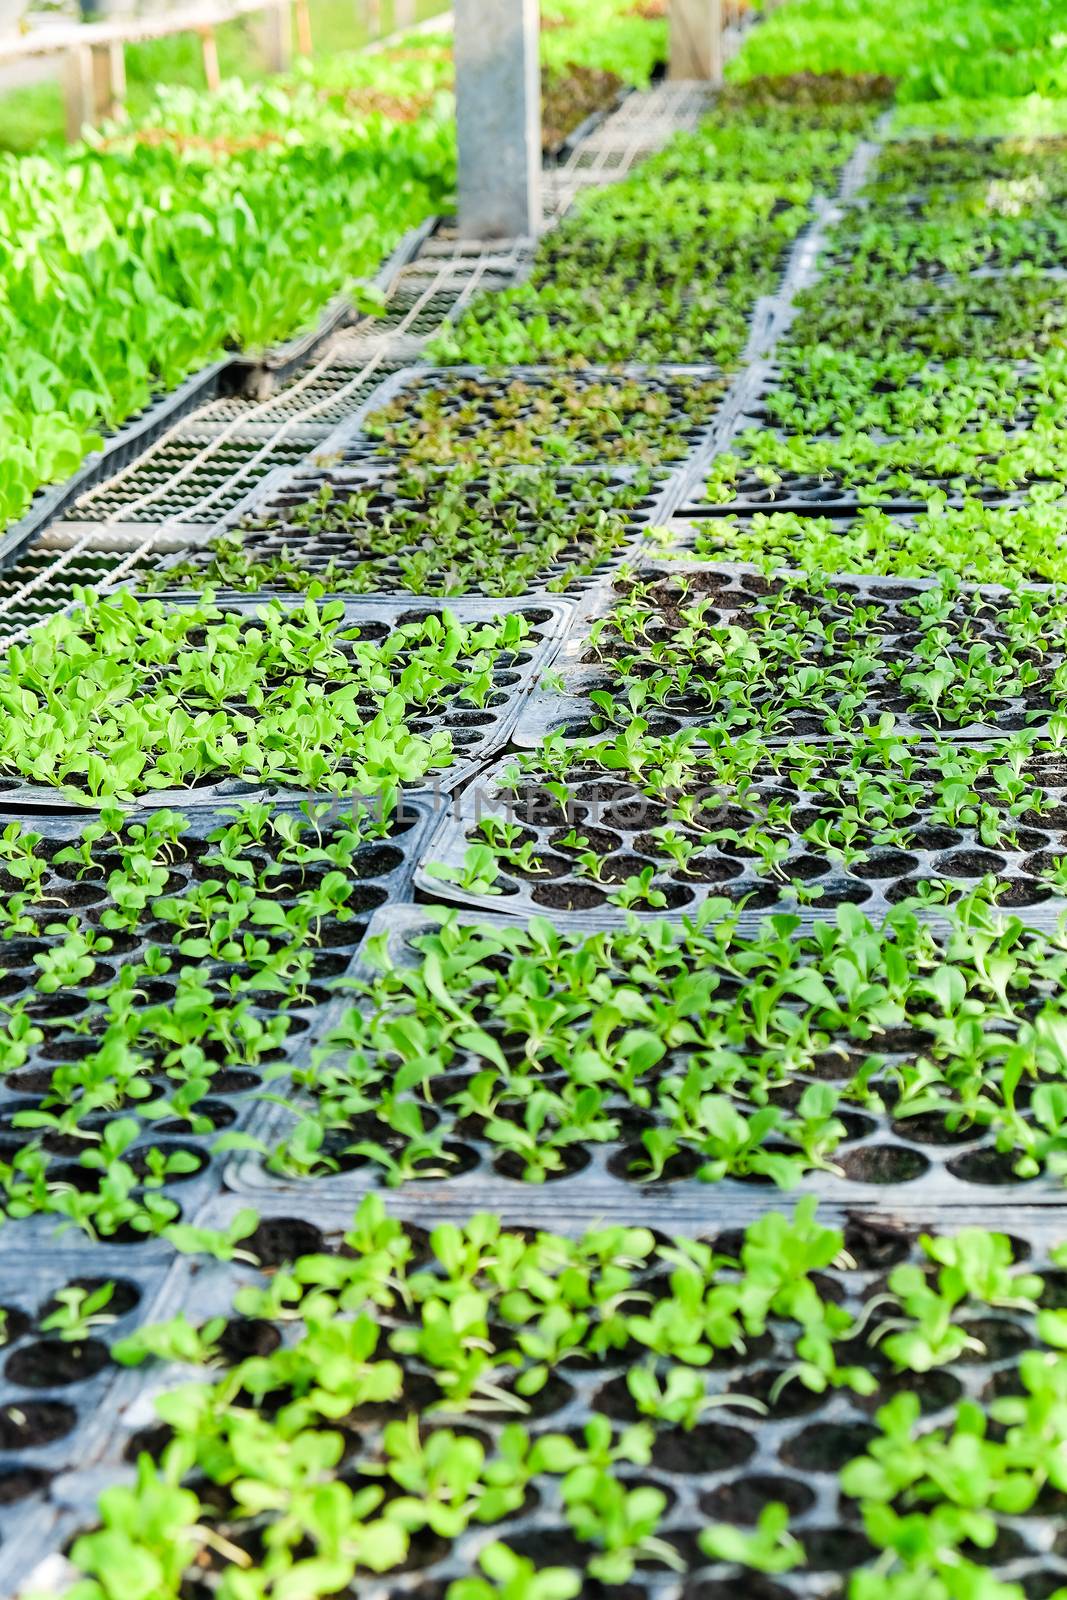 Image of young plants growing in a greenhouse.